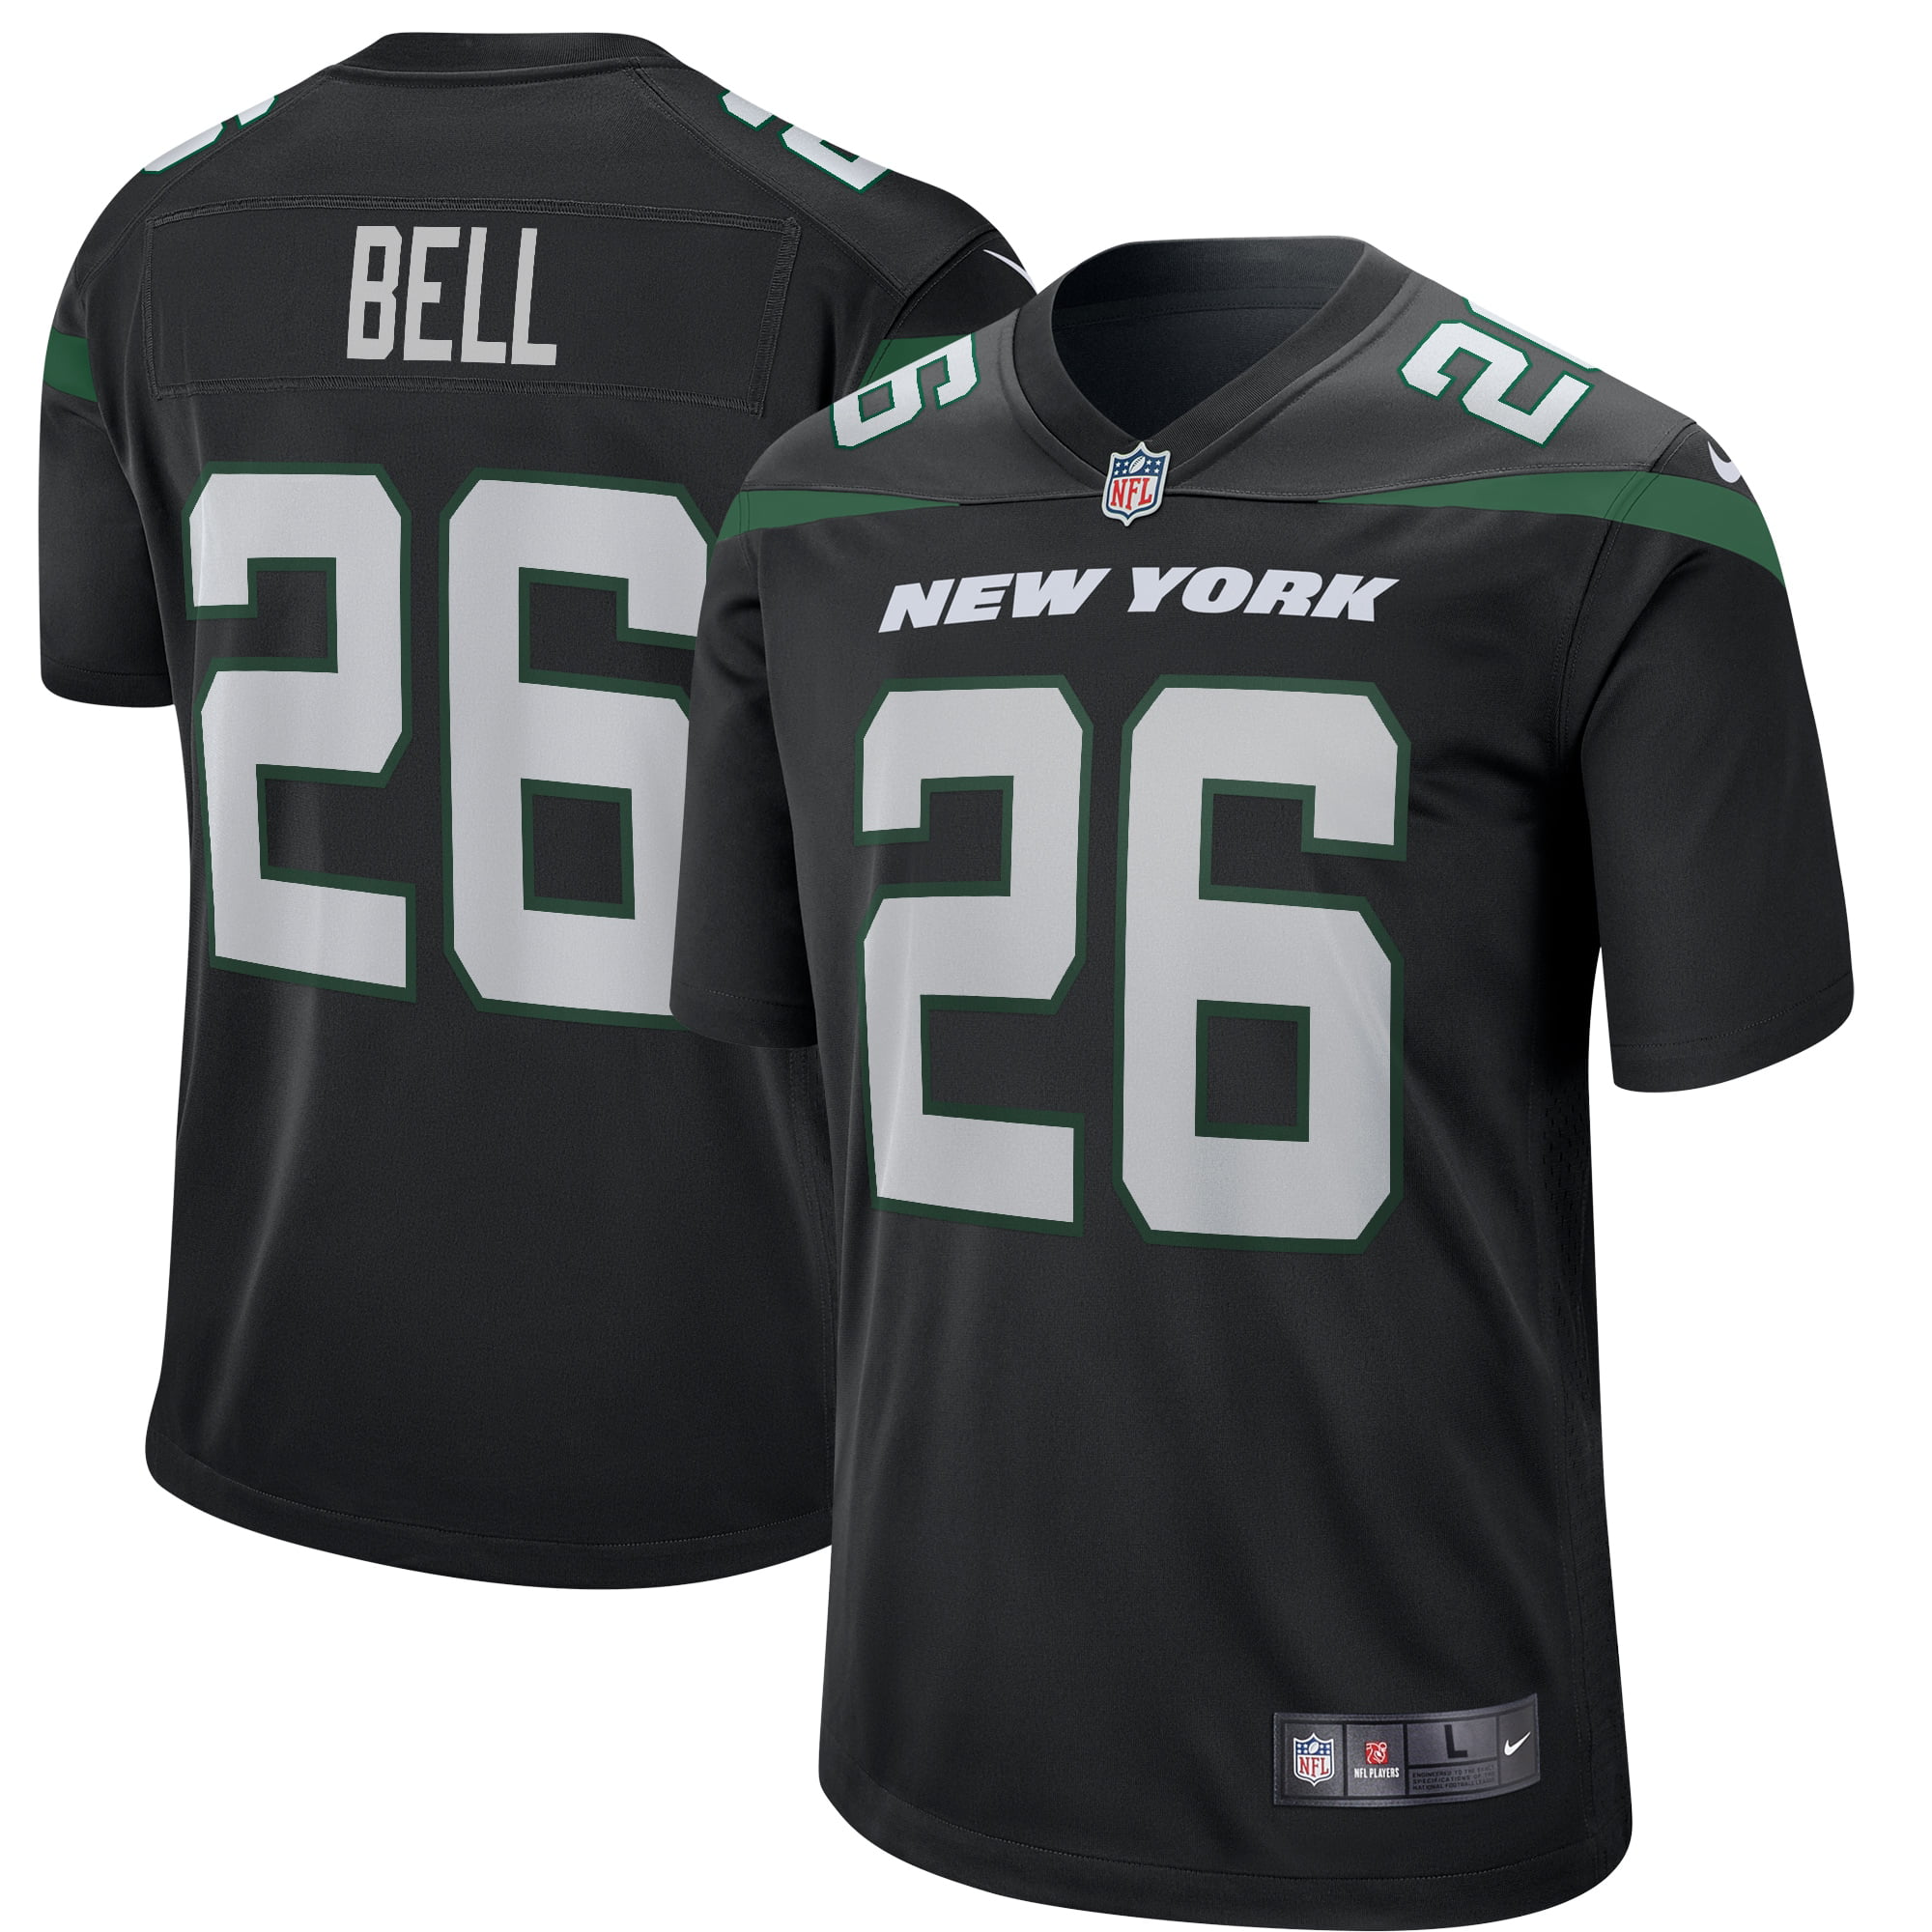 leveon bell stitched jersey